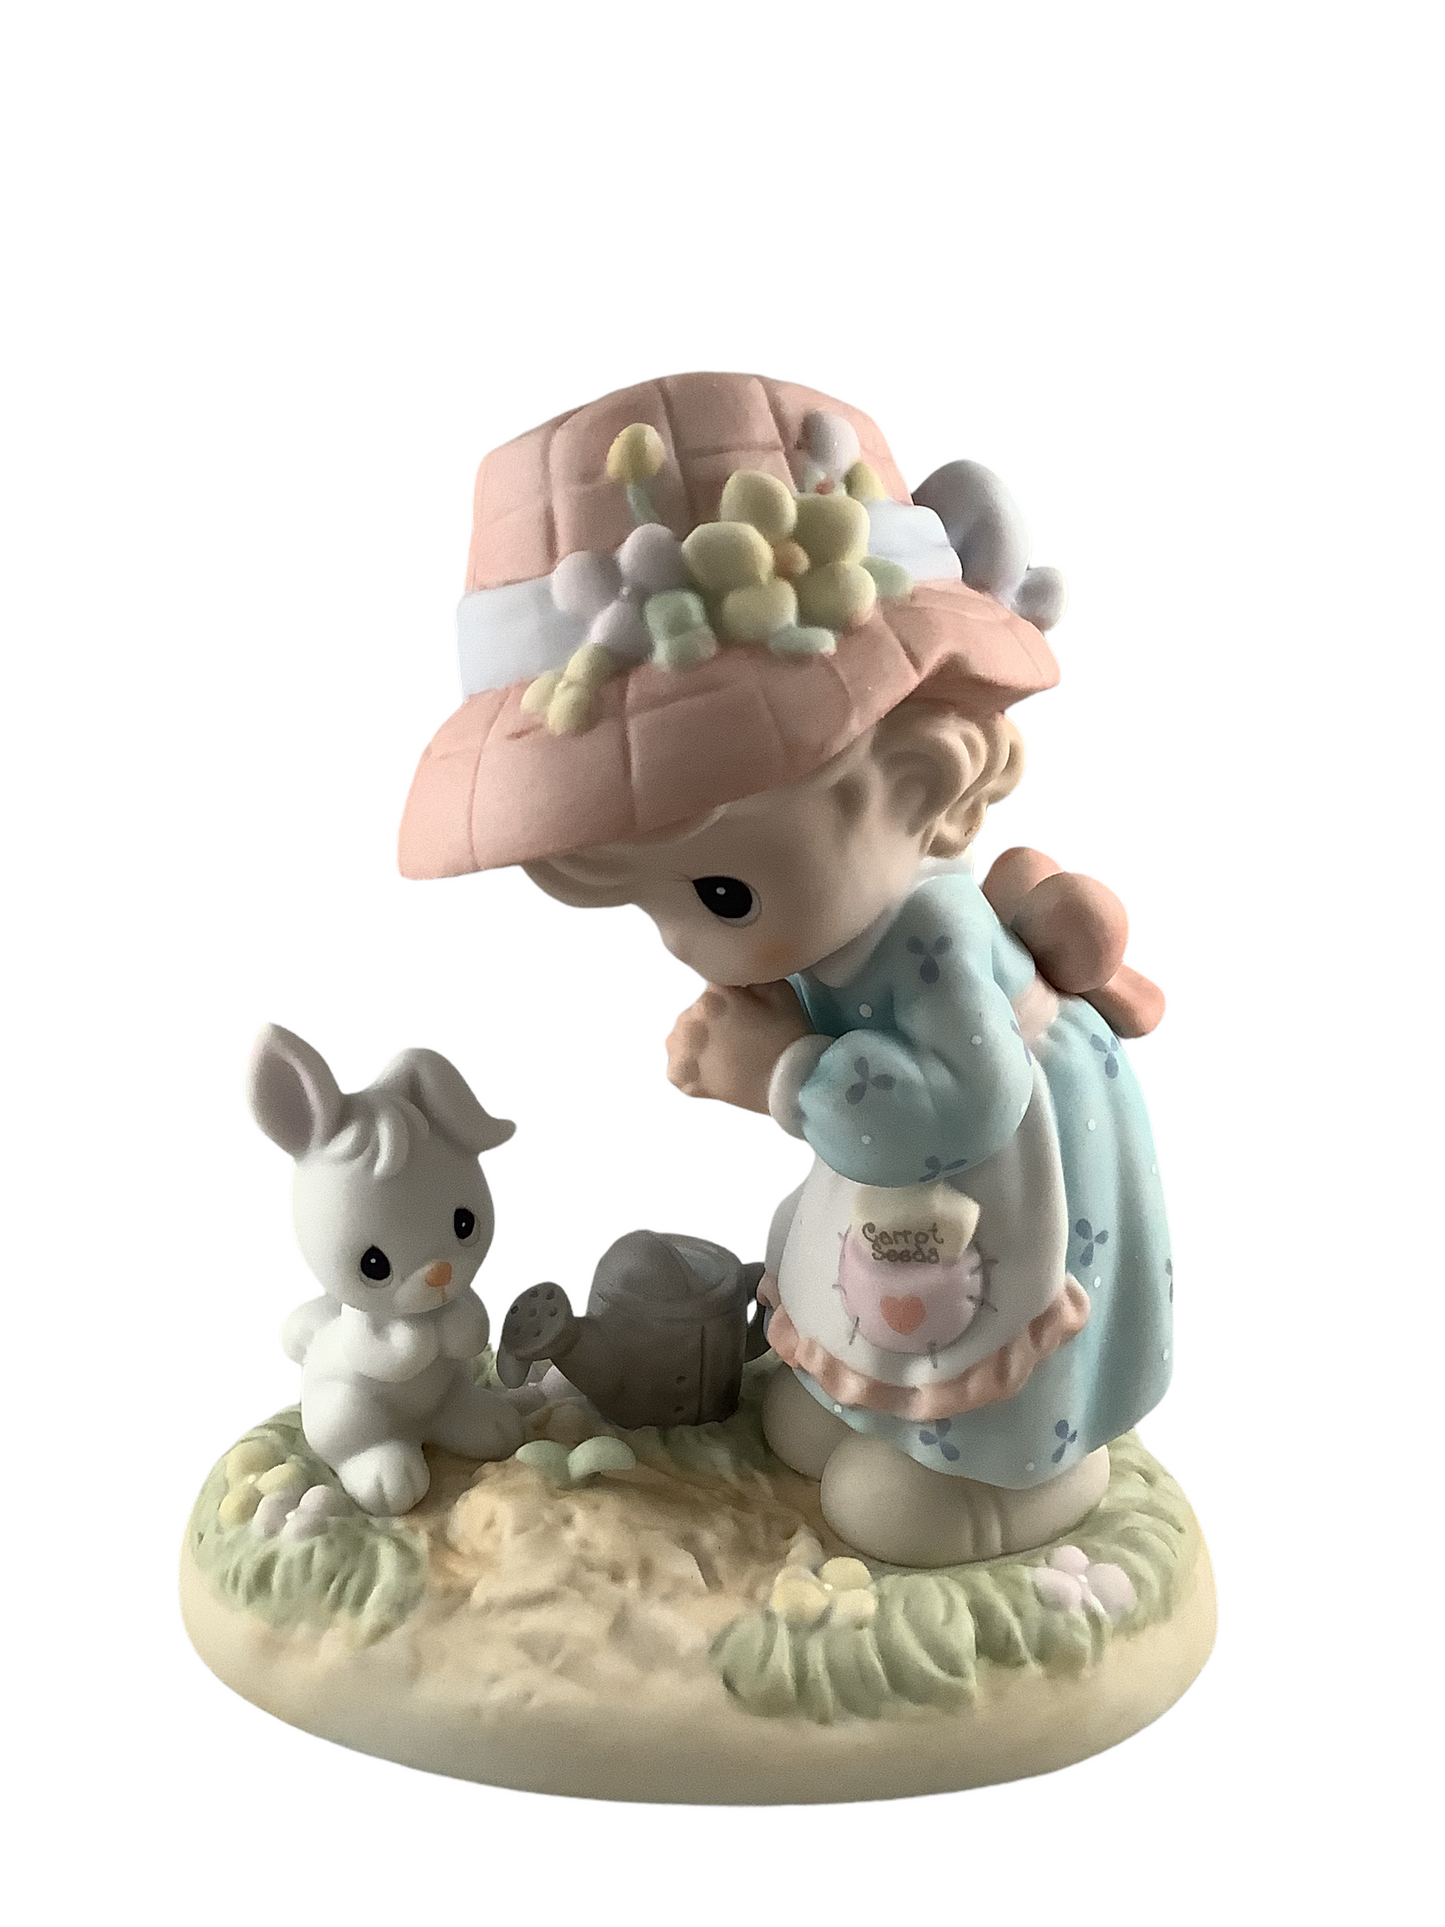 How Great Is His Goodness - Precious Moment Figurine